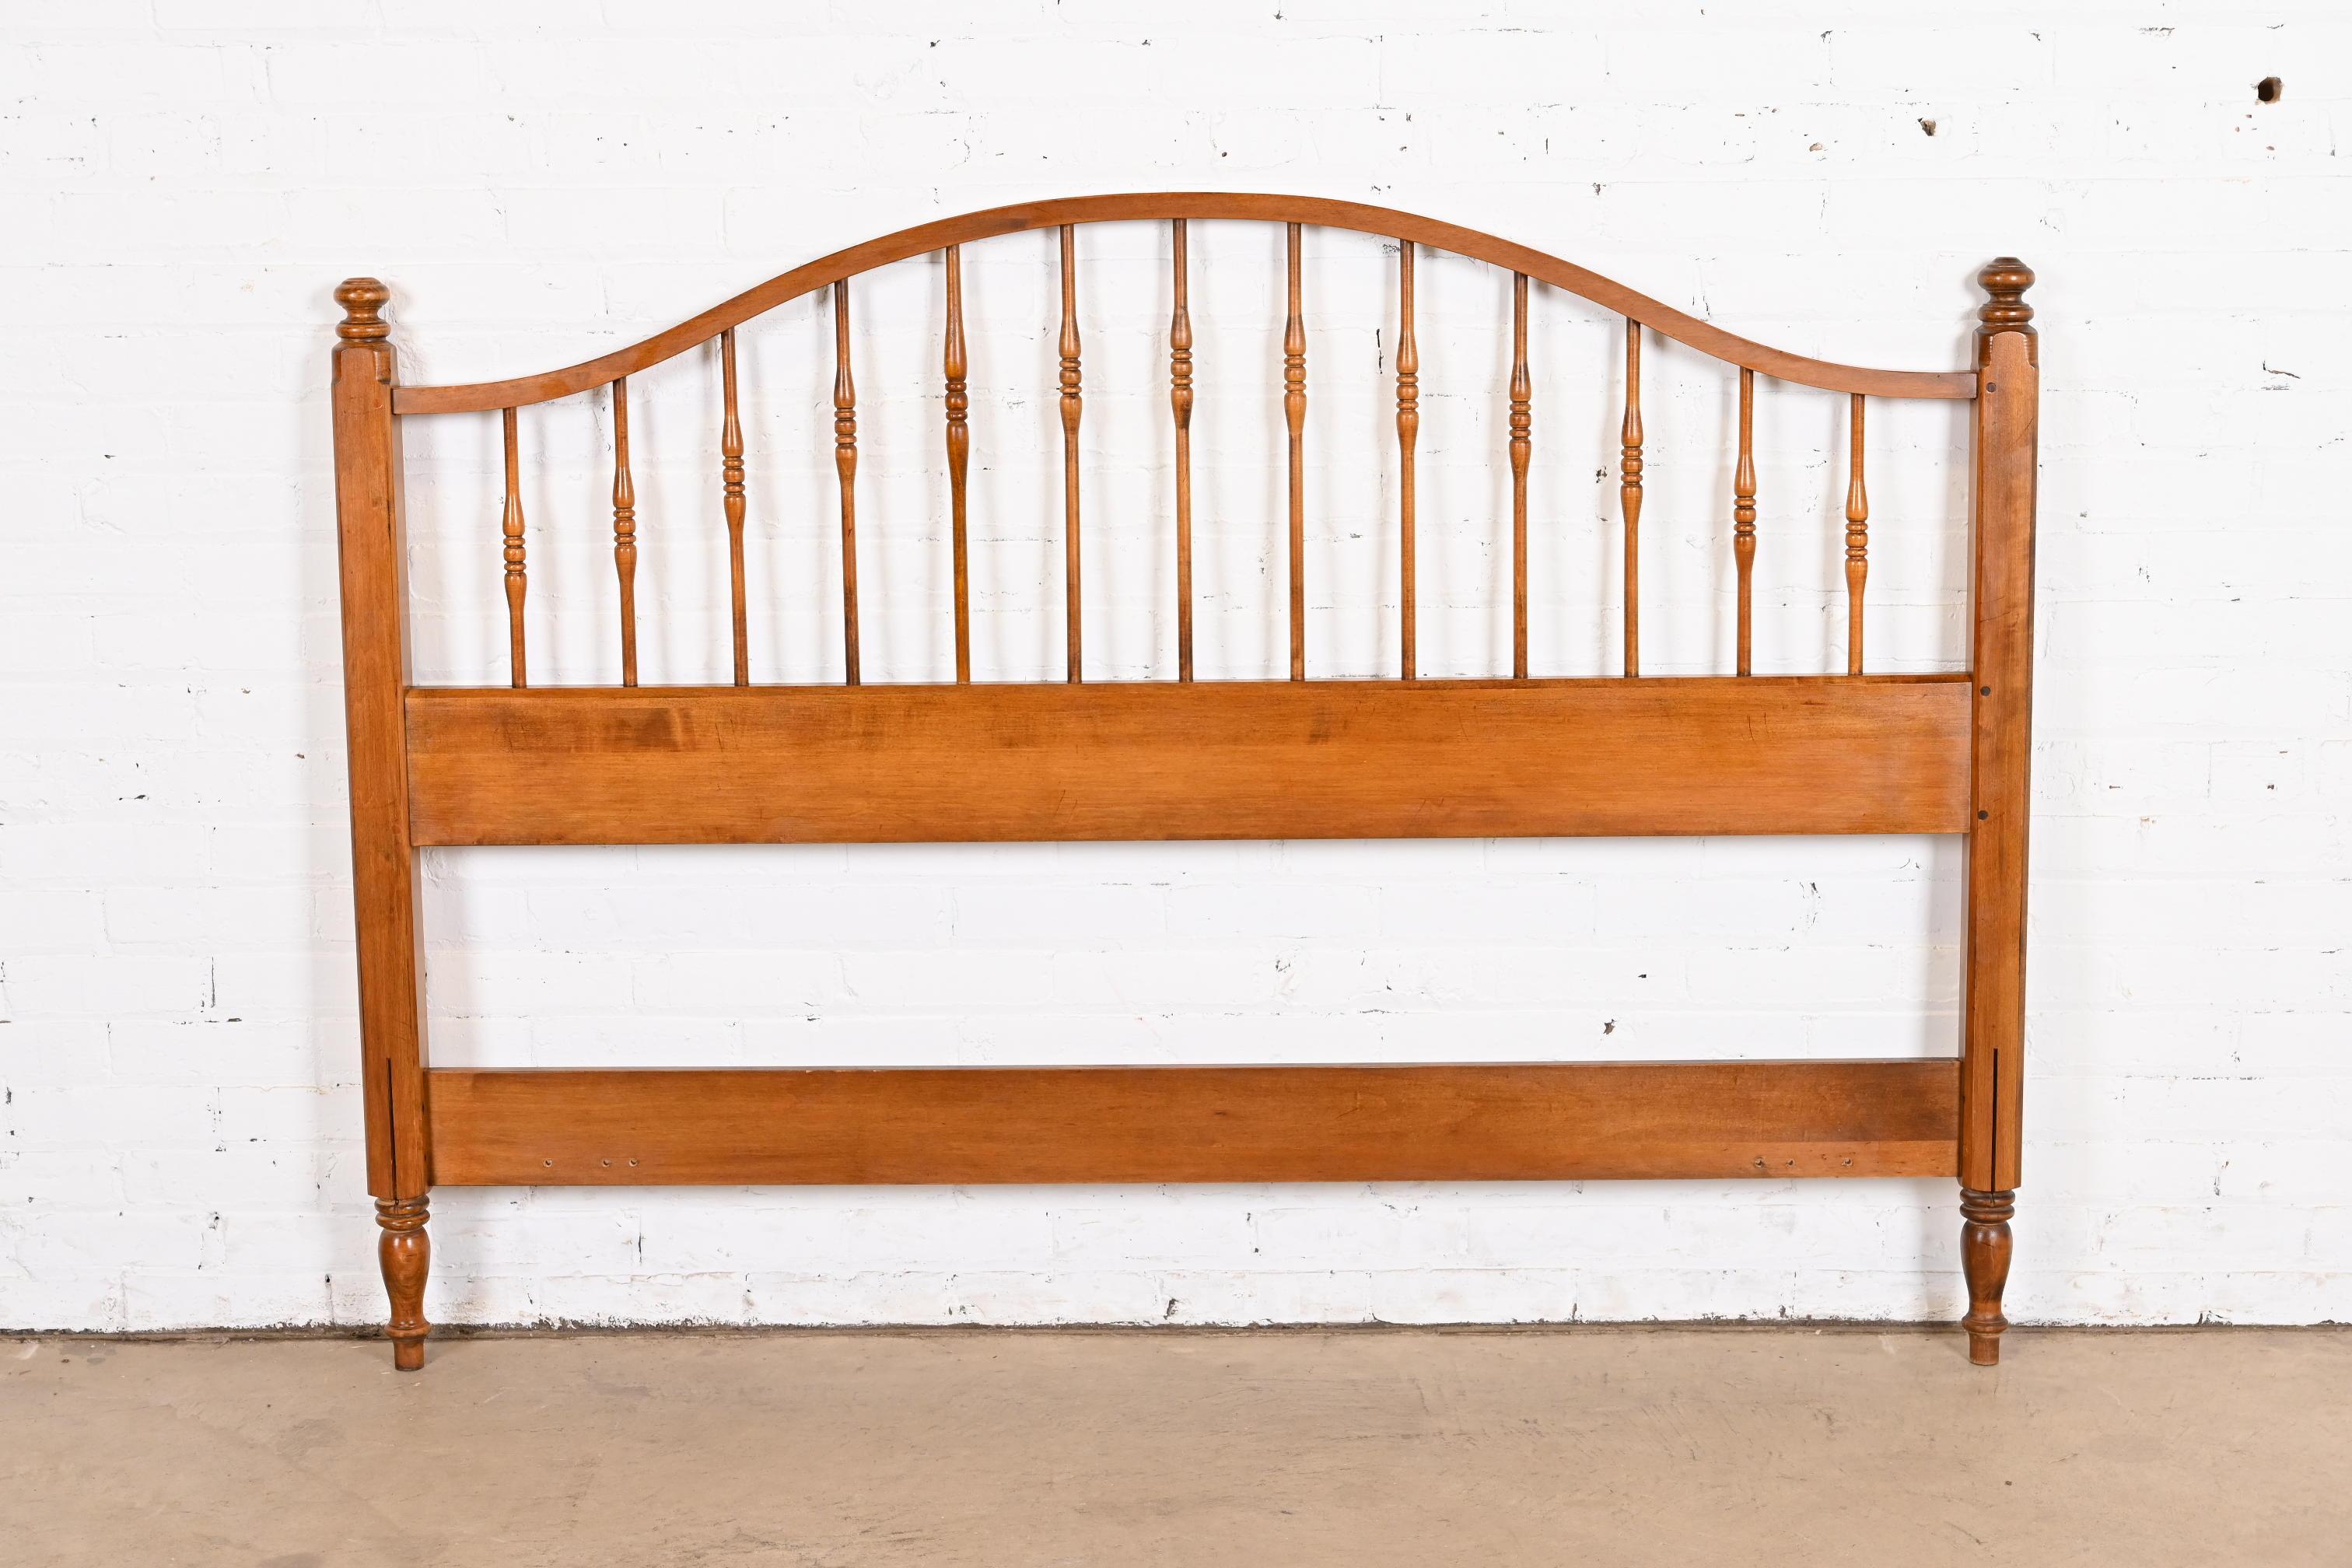 A gorgeous Early American or Shaker style carved maple queen size spindle headboard

USA, Late 20th Century

Measures: 64.25